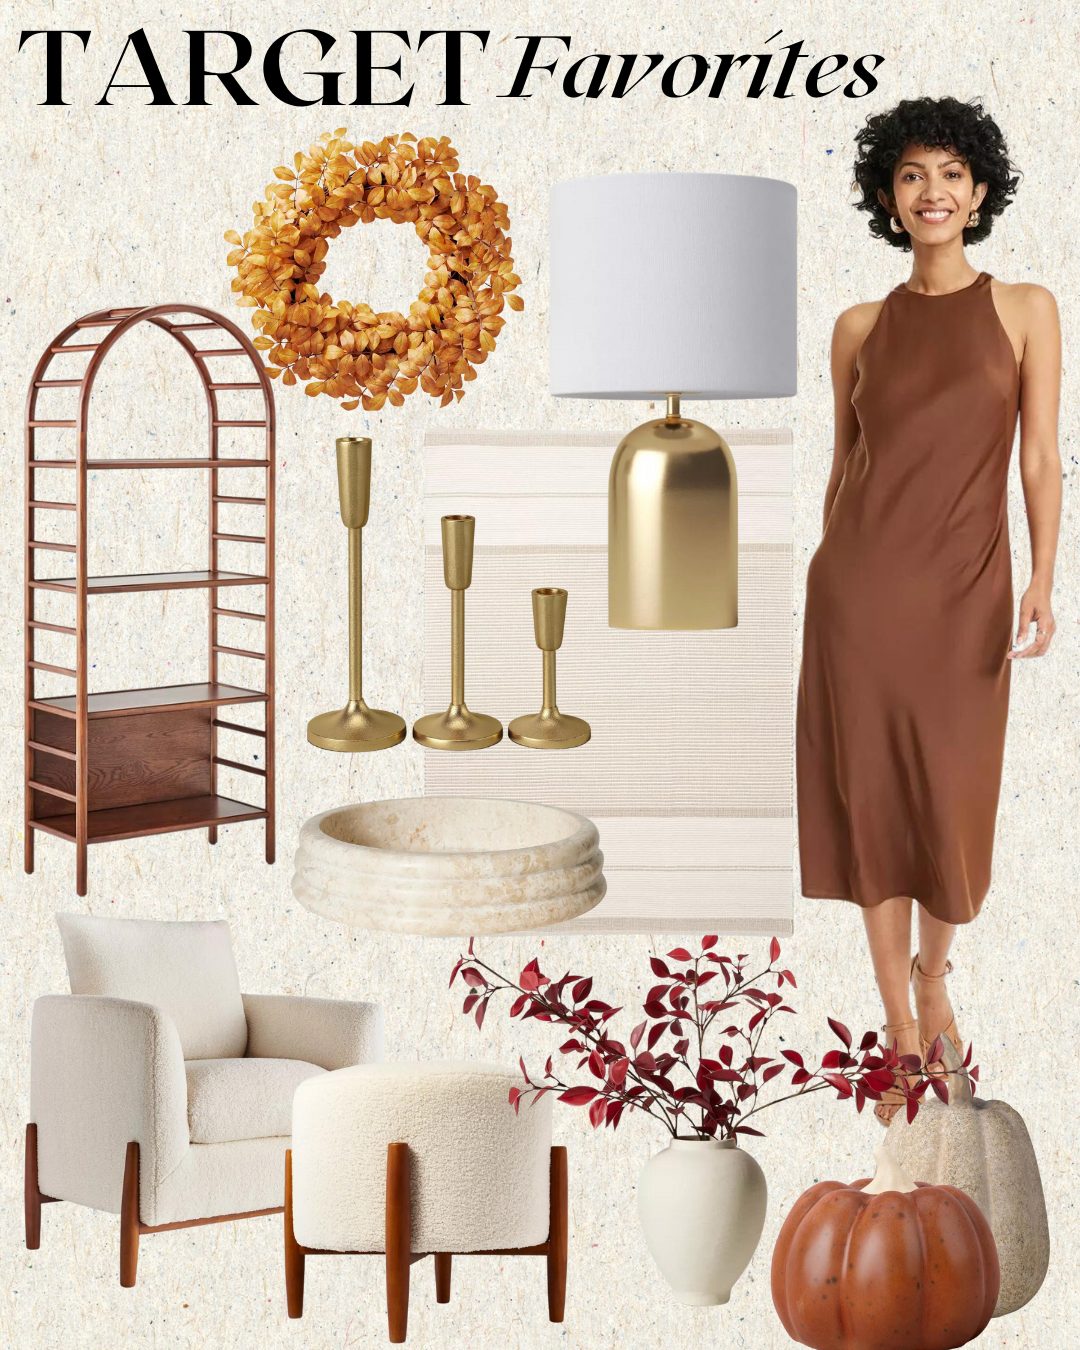 Target Favorites - fall fashion and home decor